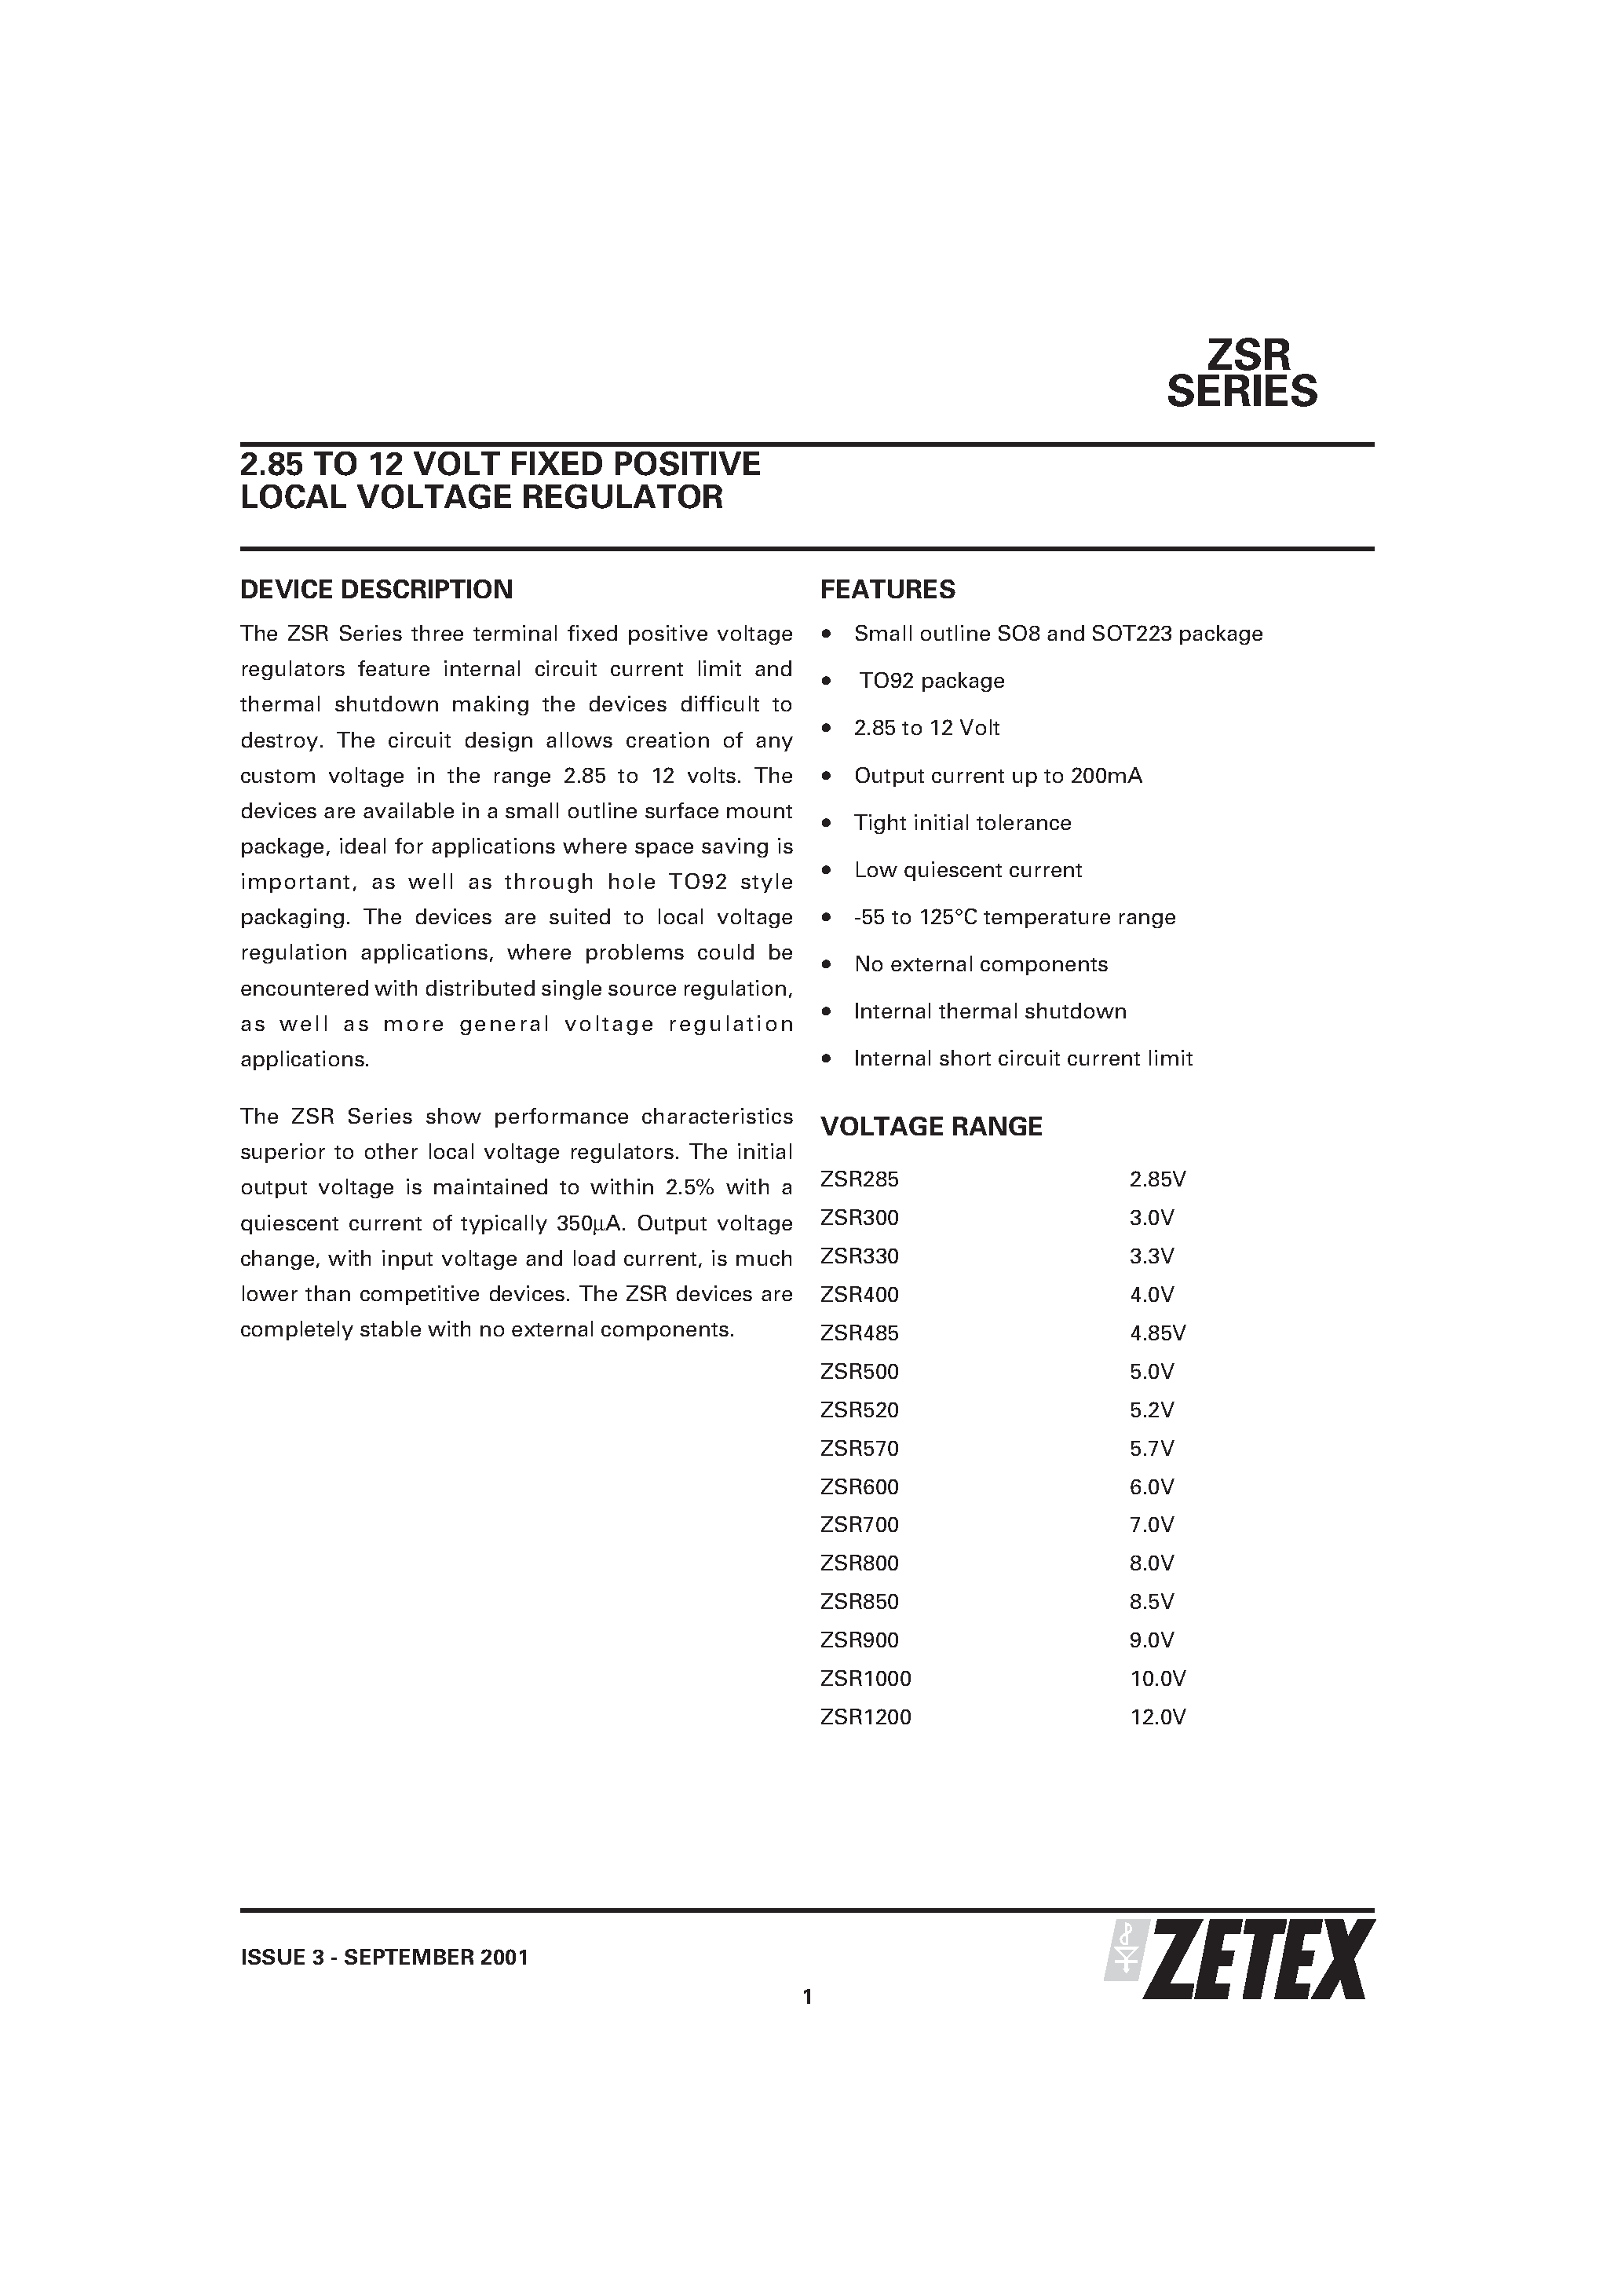 Datasheet ZSR300C - 2.85 TO 12 VOLT FIXED POSITIVE LOCAL VOLTAGE REGULATOR page 1